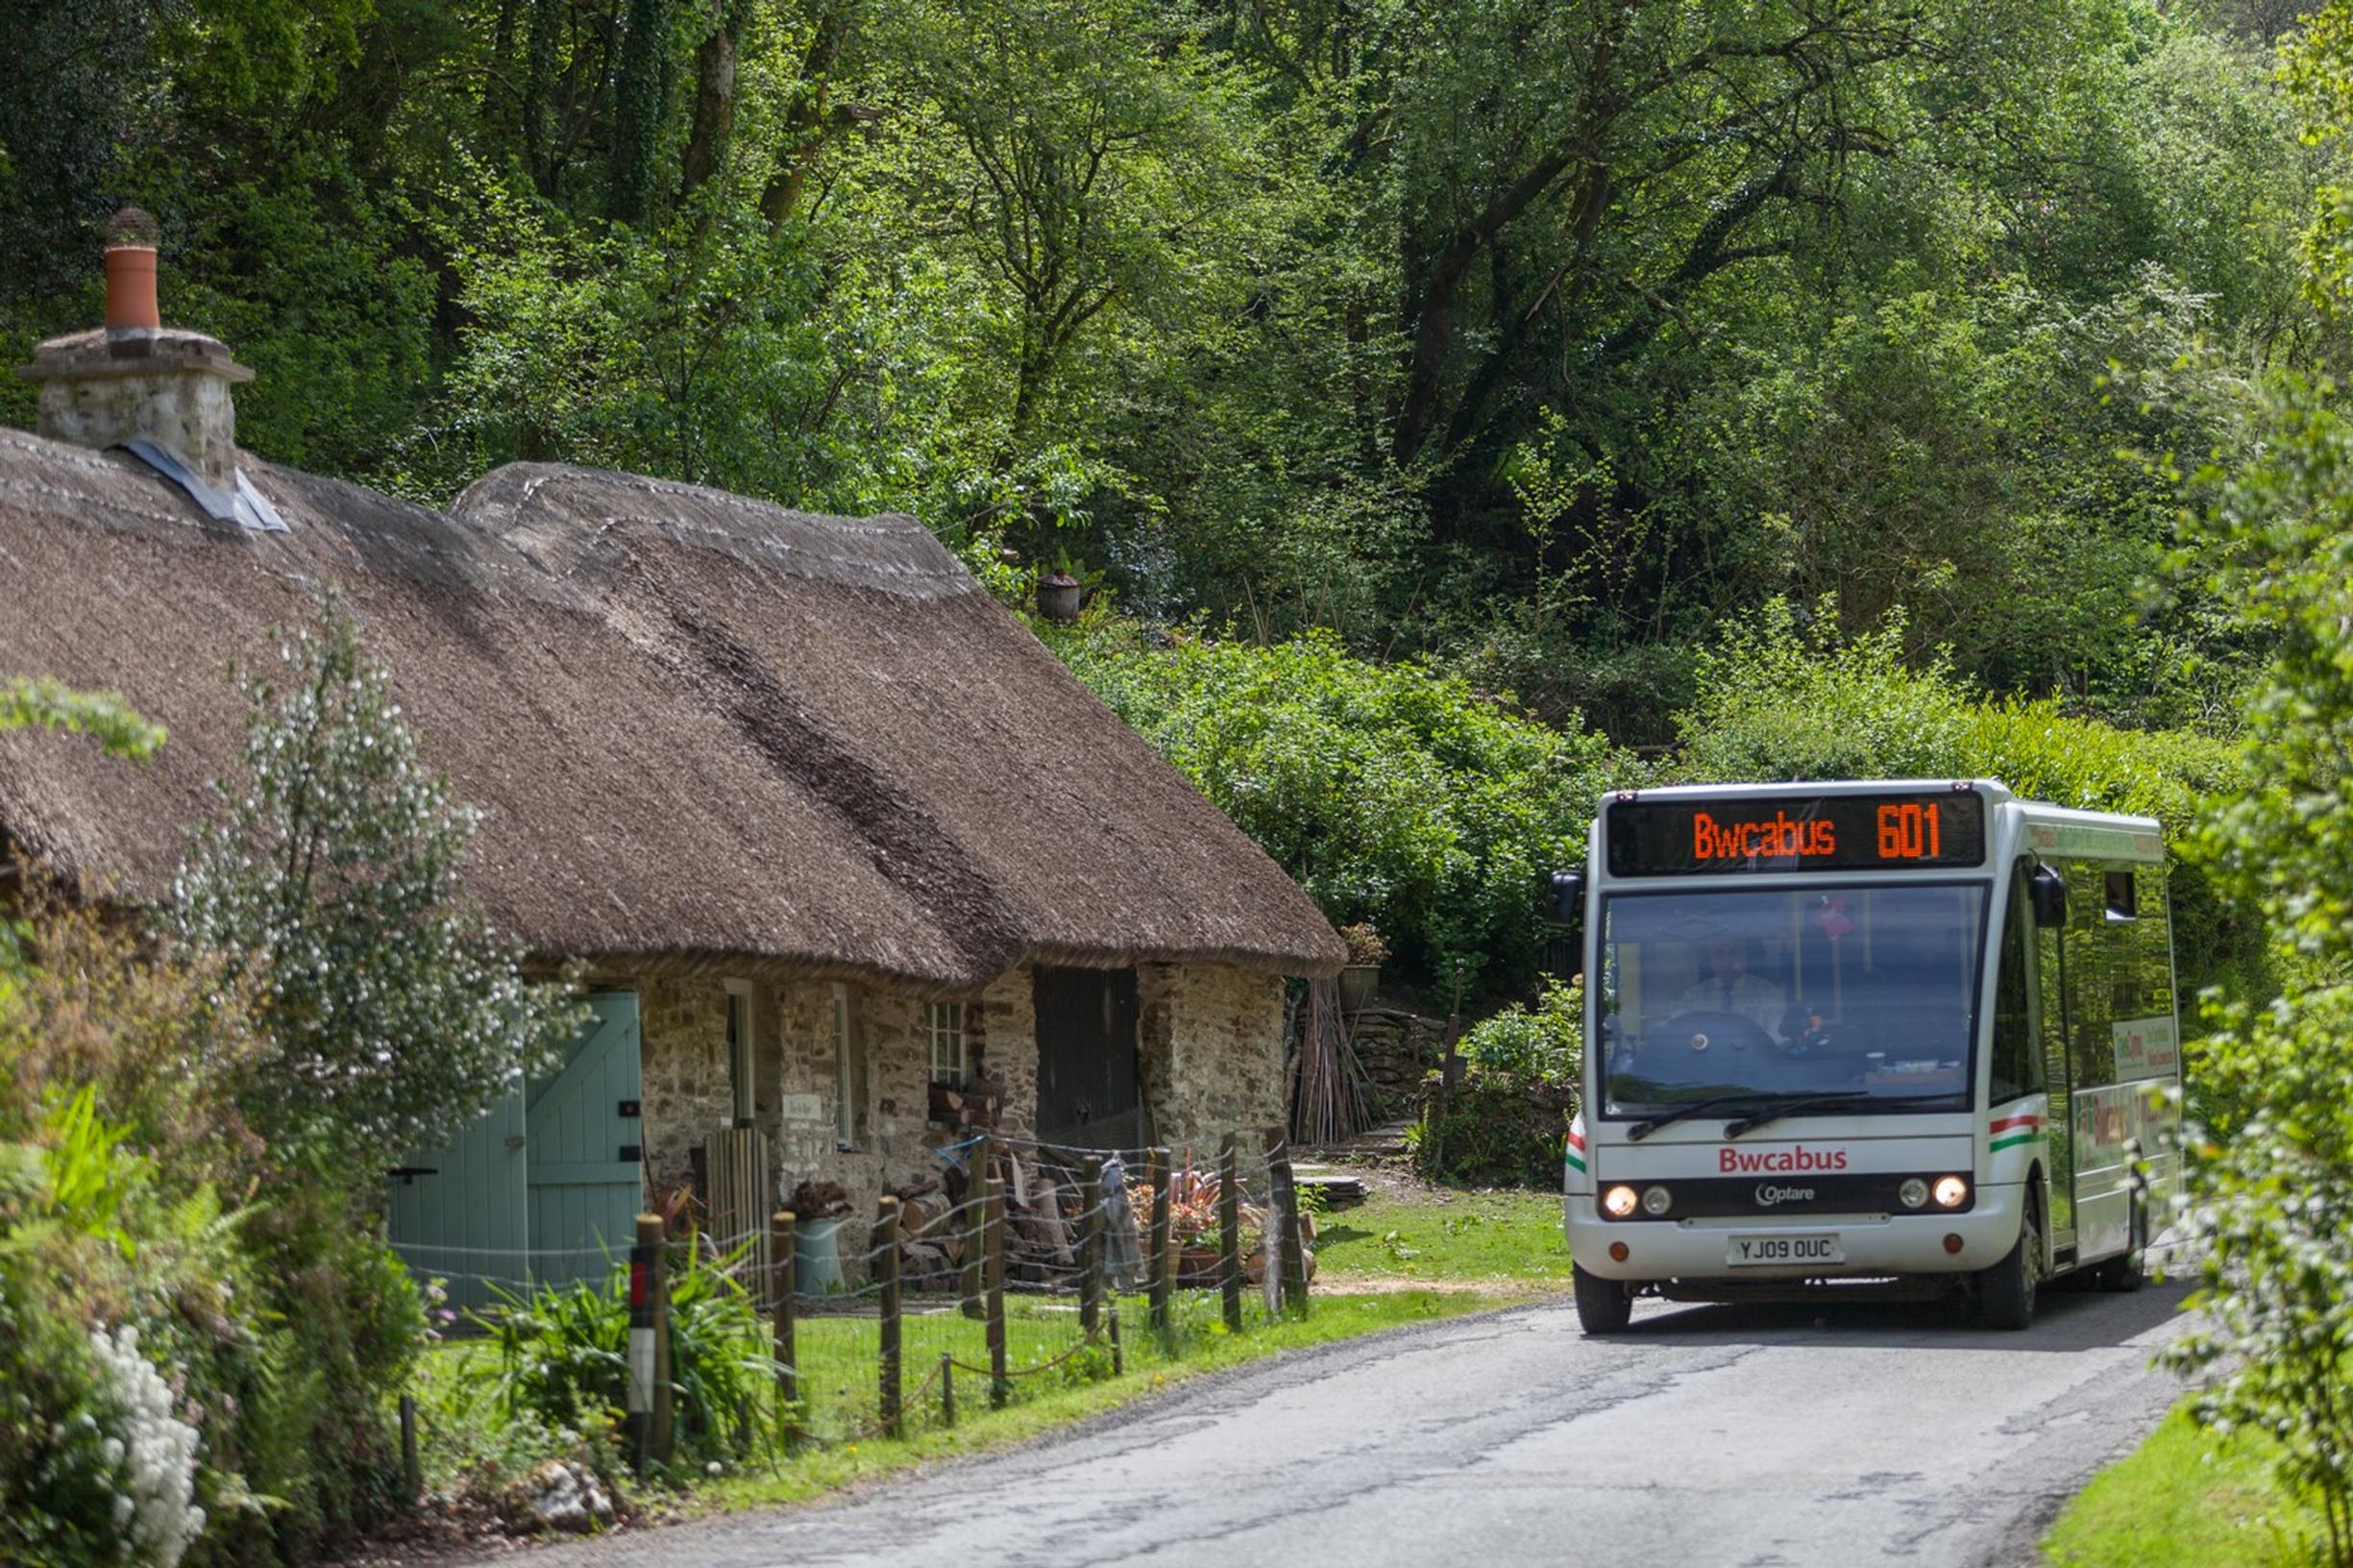 Bwcabus was designed to connect rural communities to towns and main bus routes